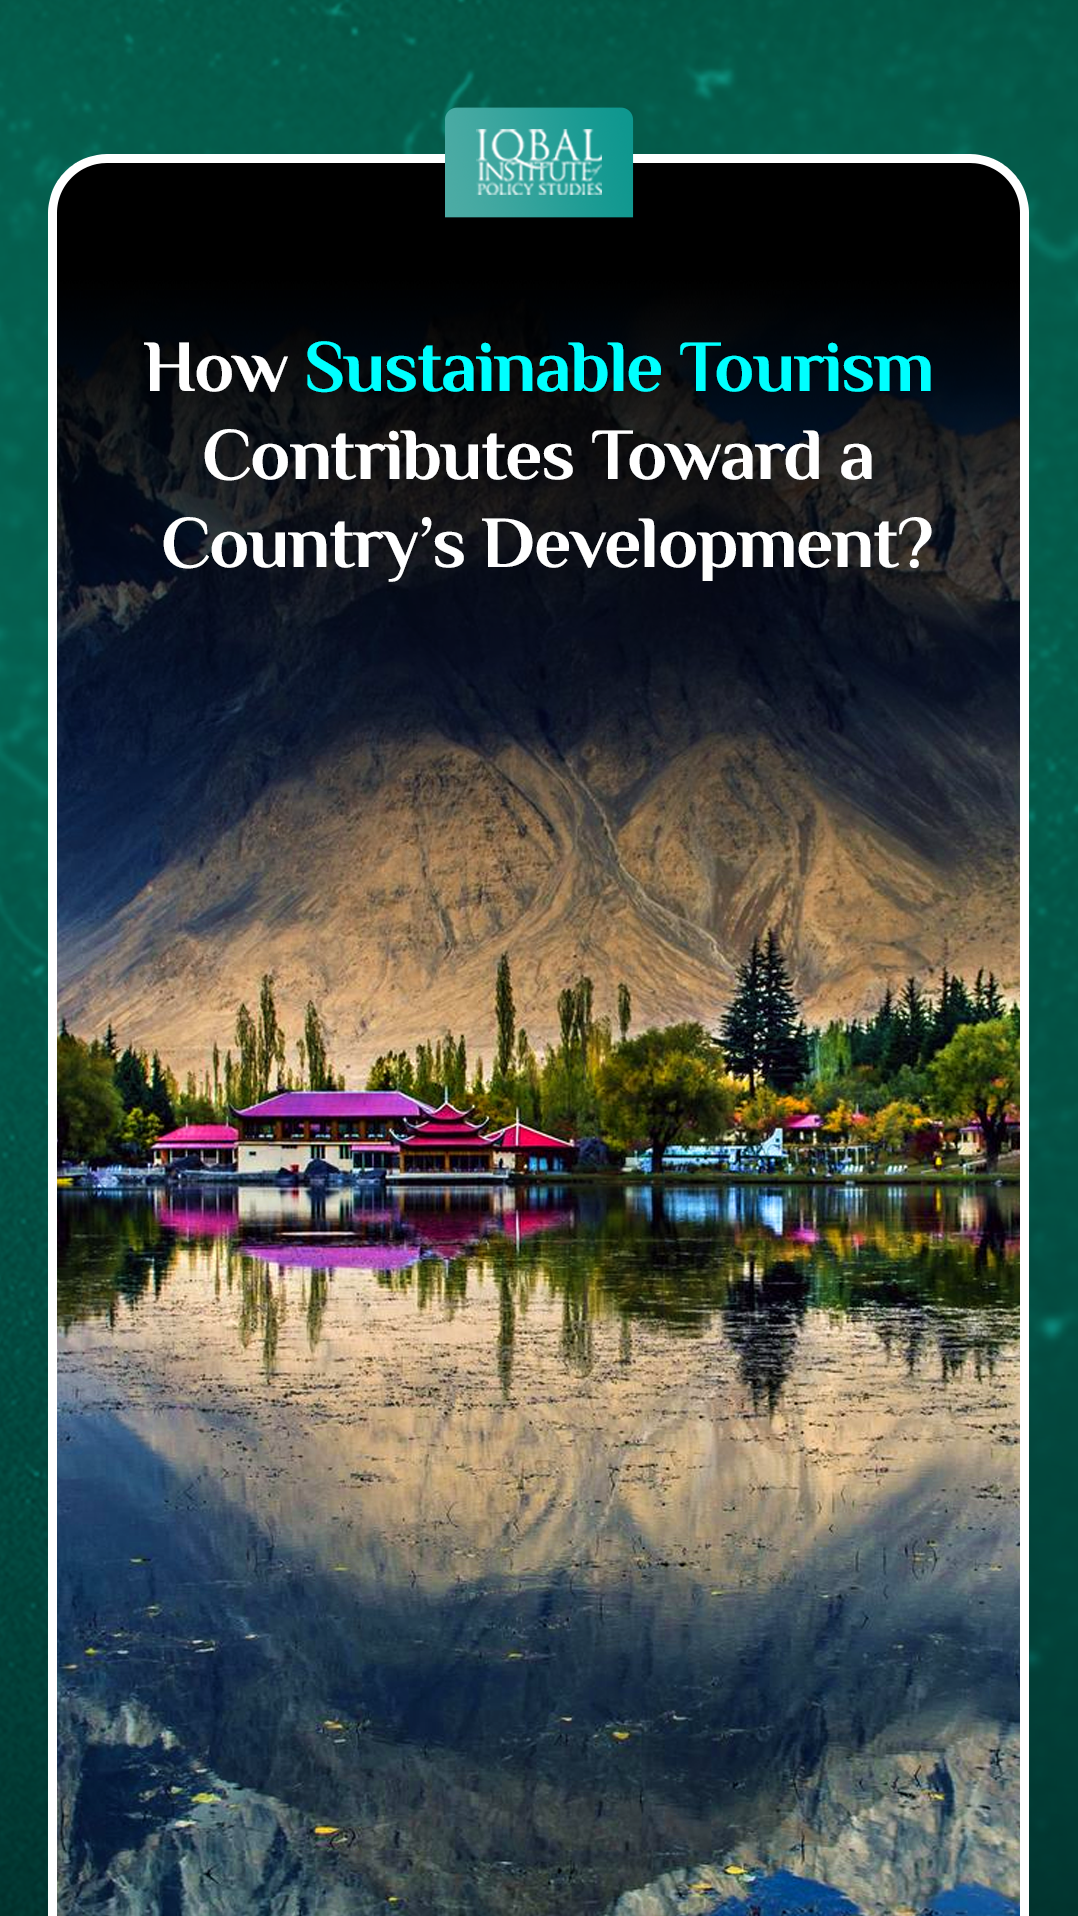 How Sustainable Tourism Contribute Towards Country’s Development?